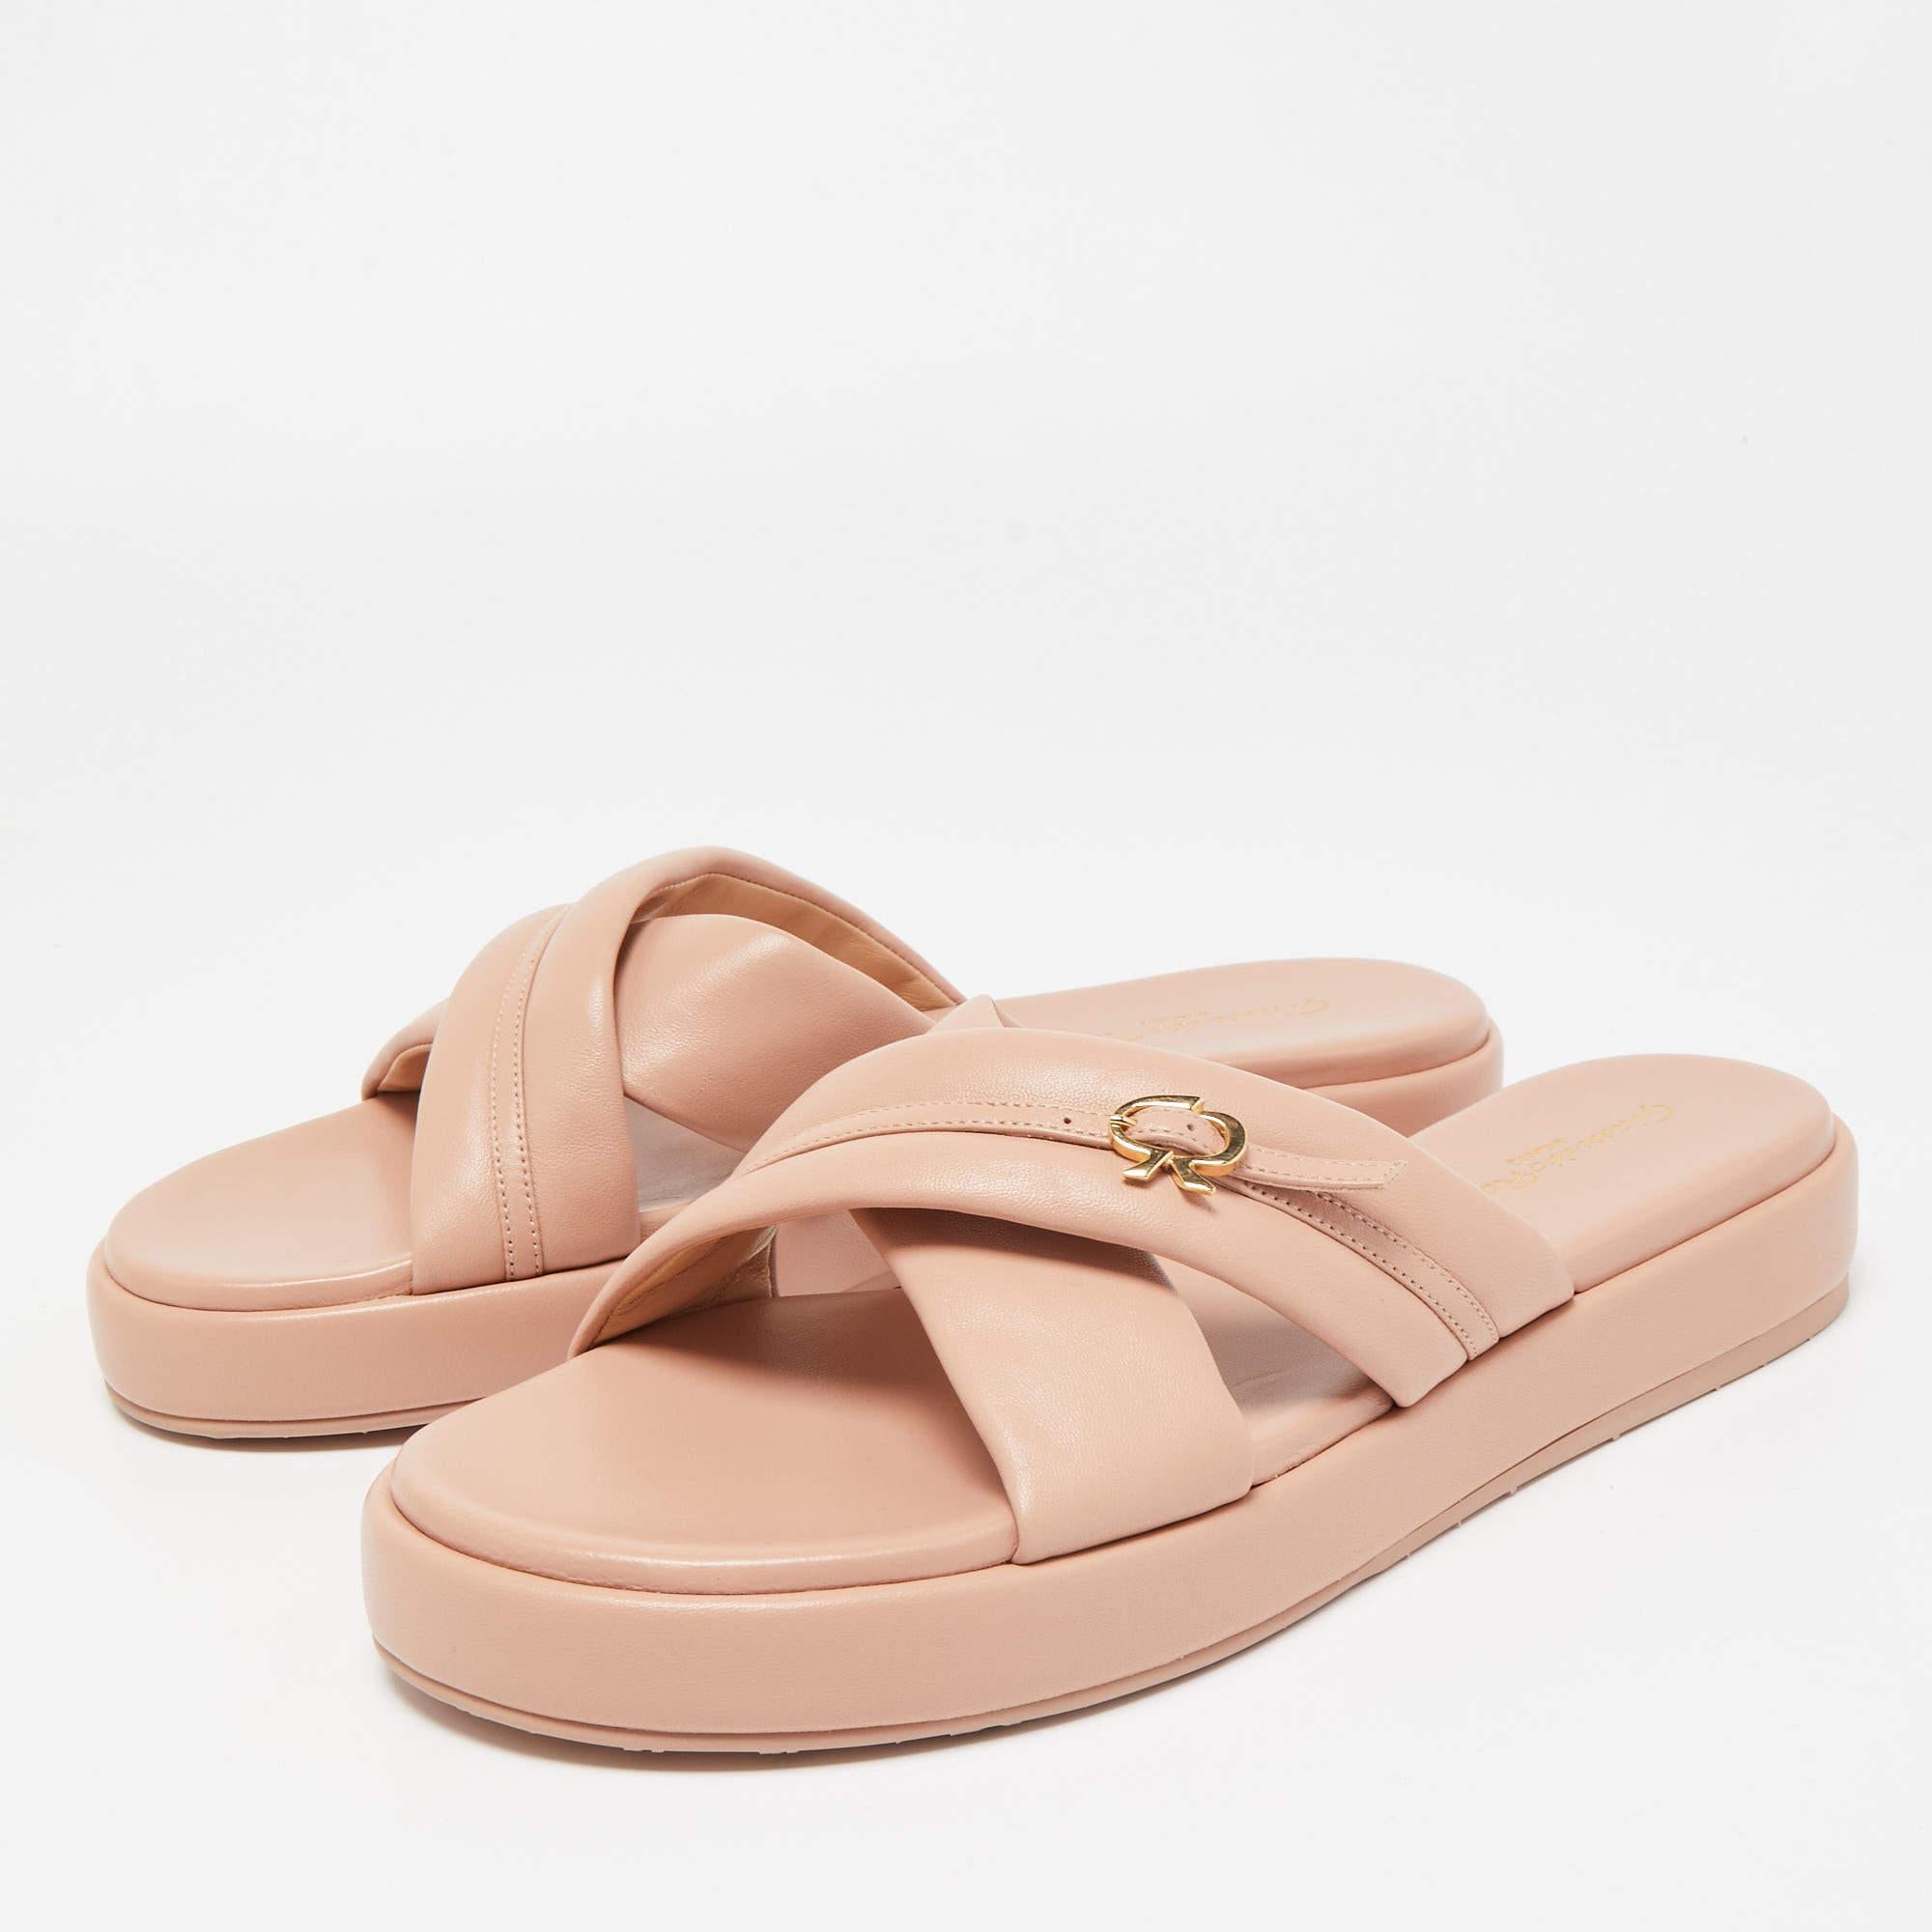 Wear these designer sandals to spruce up any outfit. They are versatile, chic, and can be easily styled. Made using quality materials, these sandals are well-built and long-lasting.

